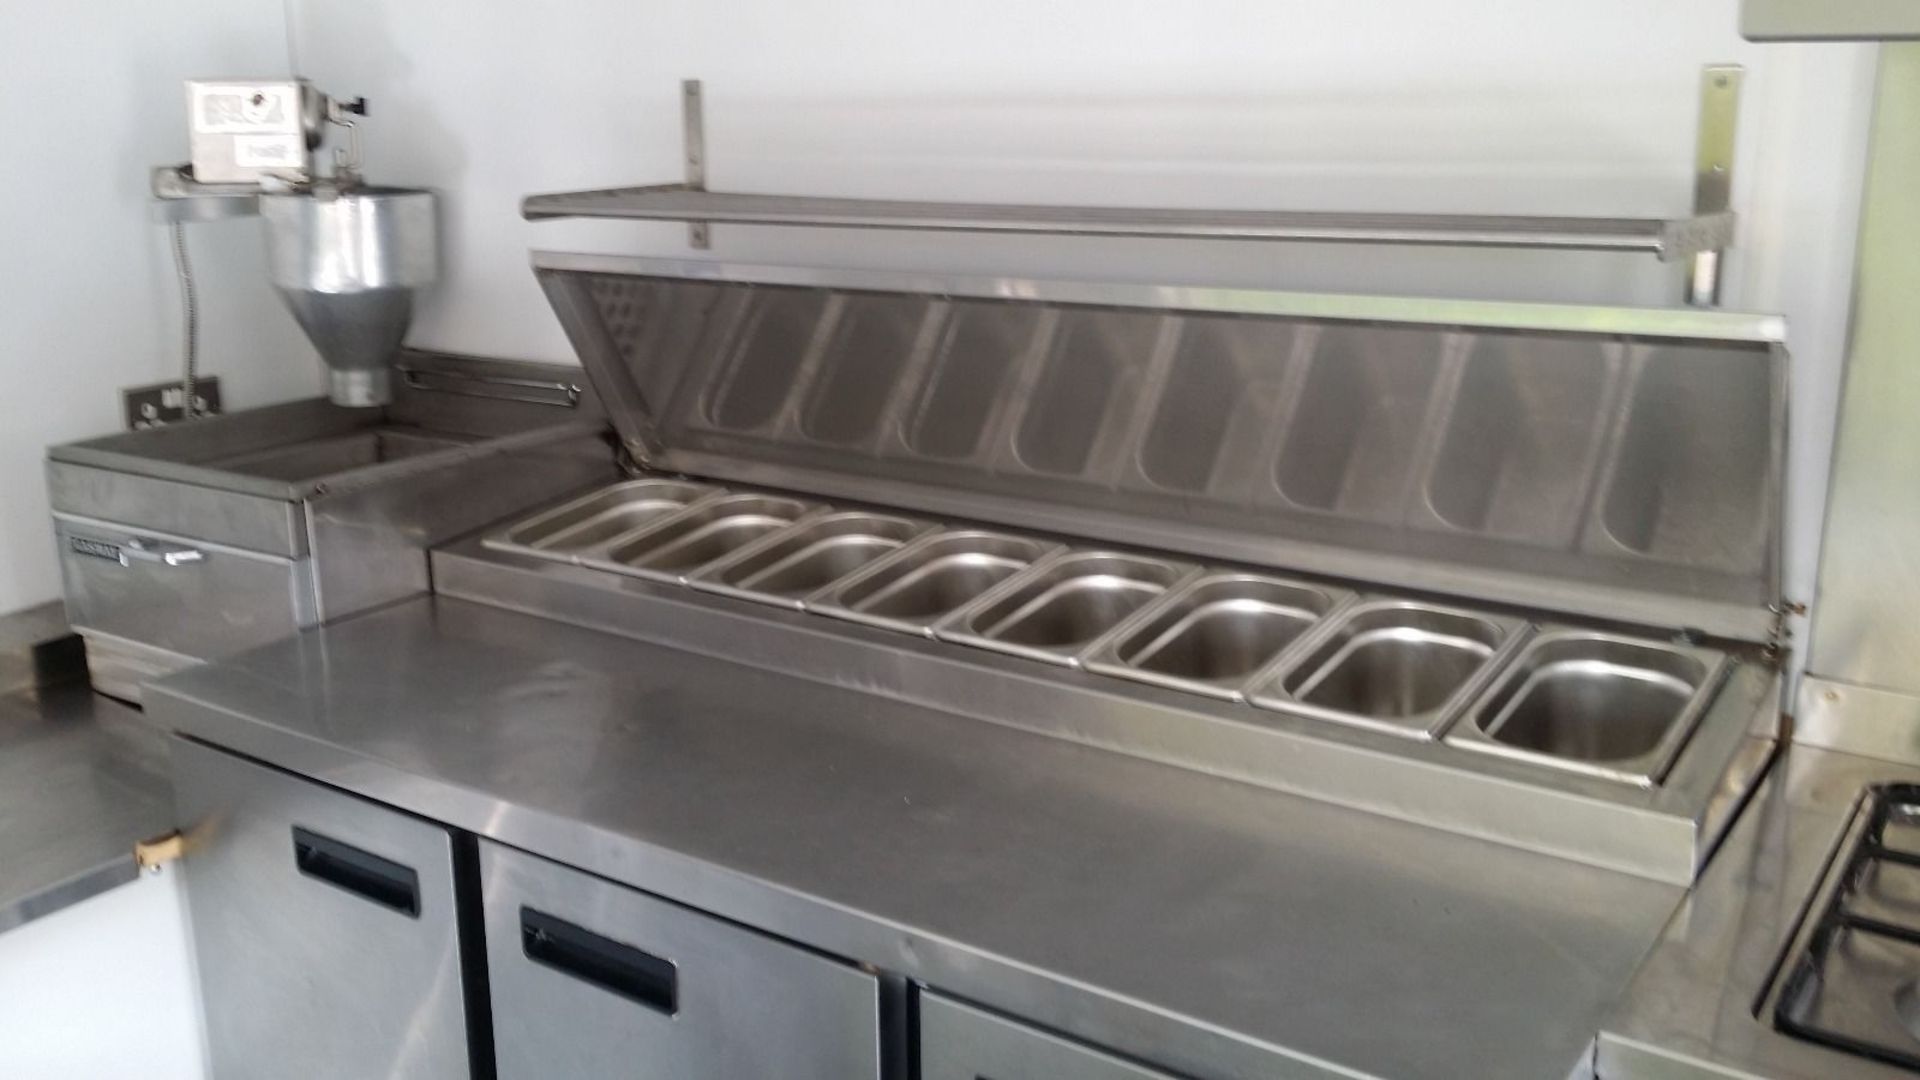 5 Star Rated A Pro Catering Unit Indespension Trailer - Bild 3 aus 7